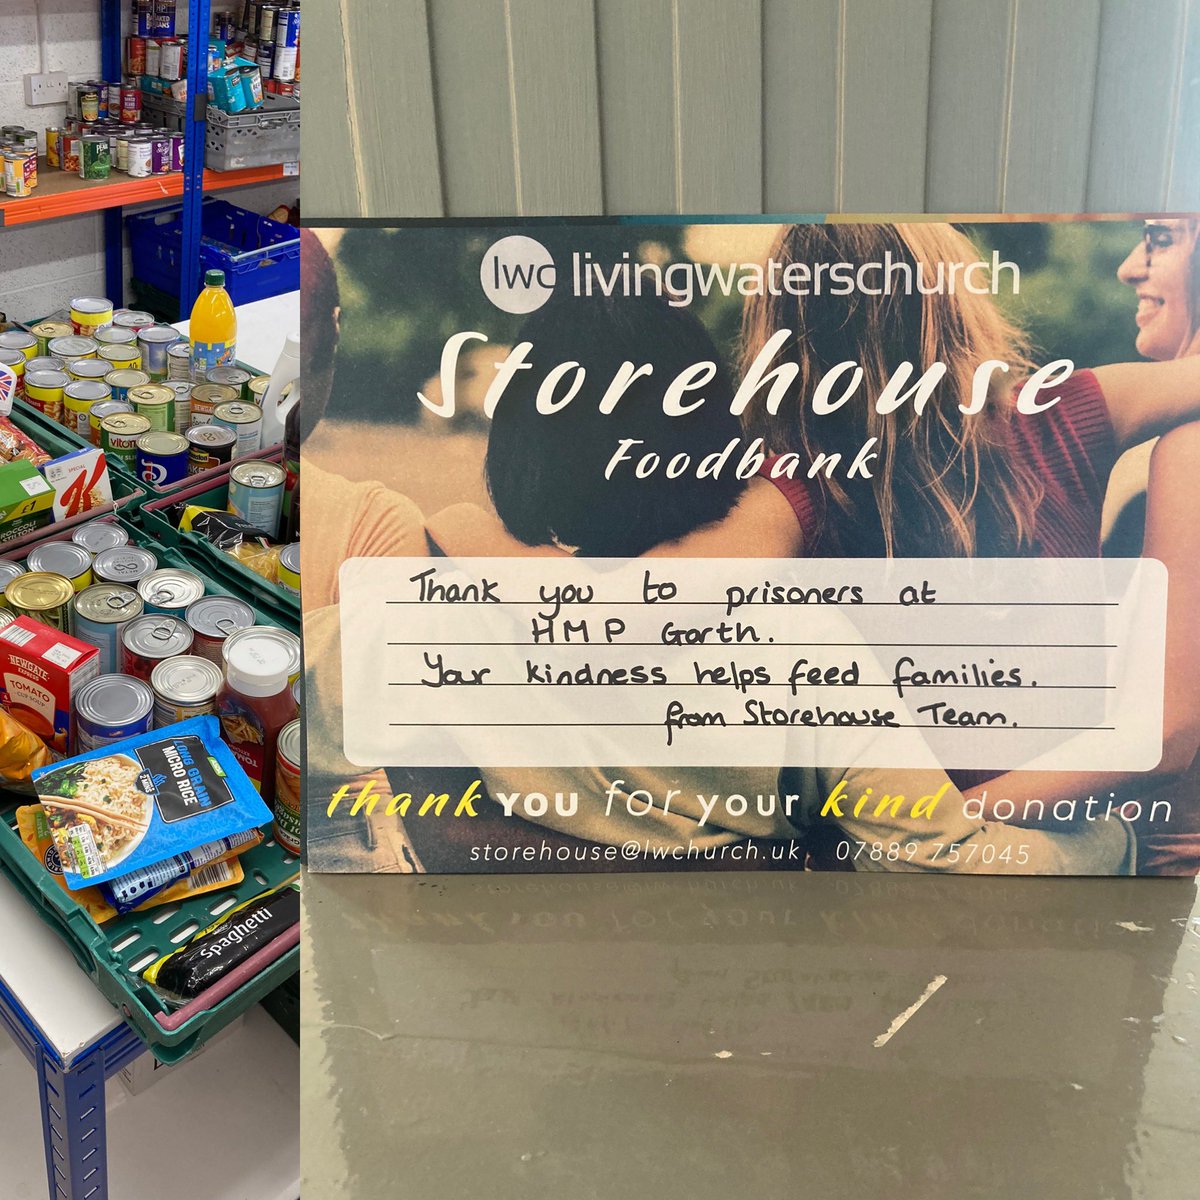 Well done to all the men that donated to our local food bank. Their contributions were greatly received this morning, helping feed those in need 👏👏